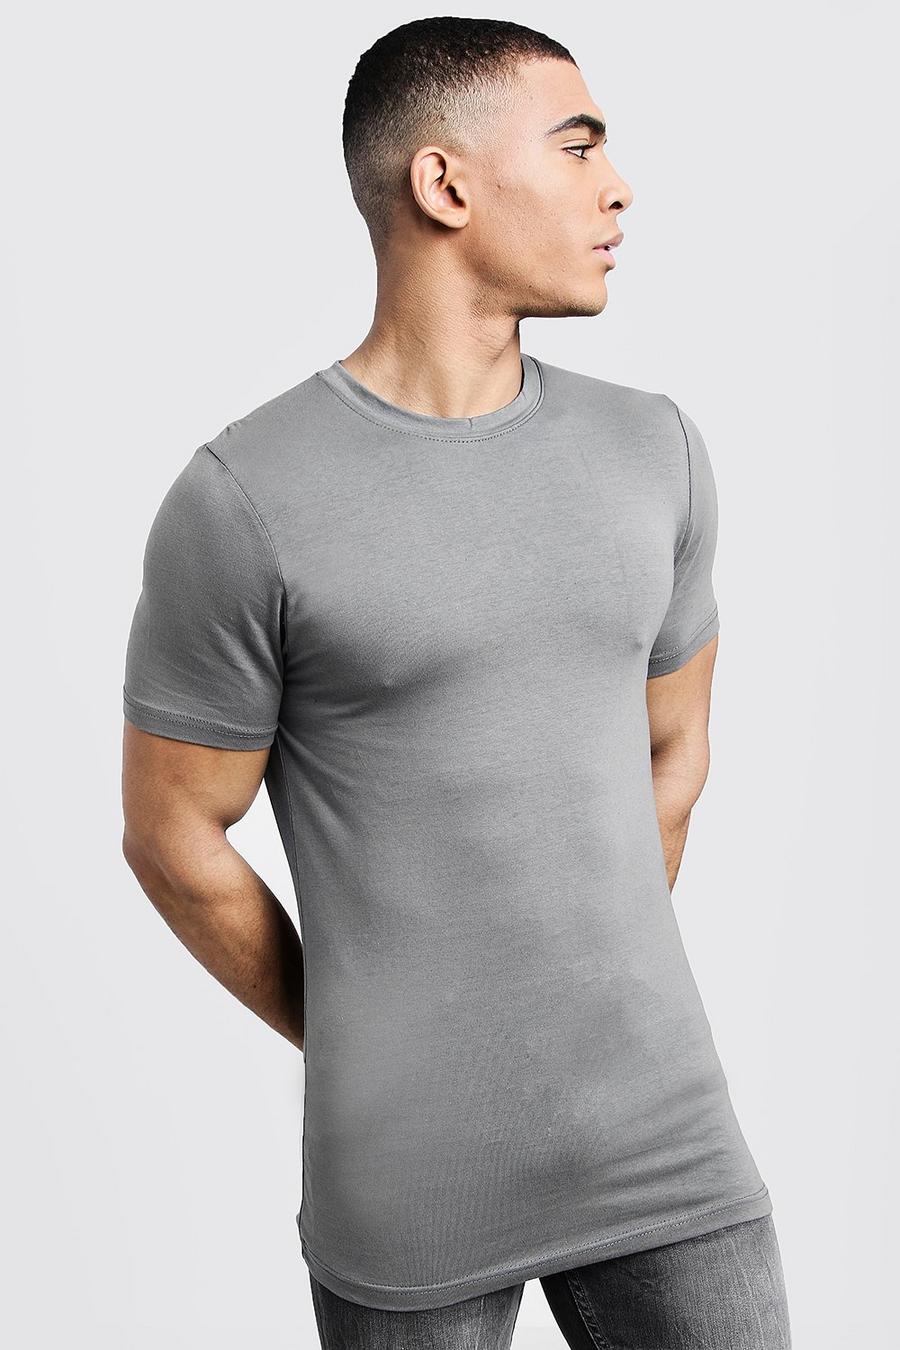 Grey Muscle Fit Crew Neck T Shirt